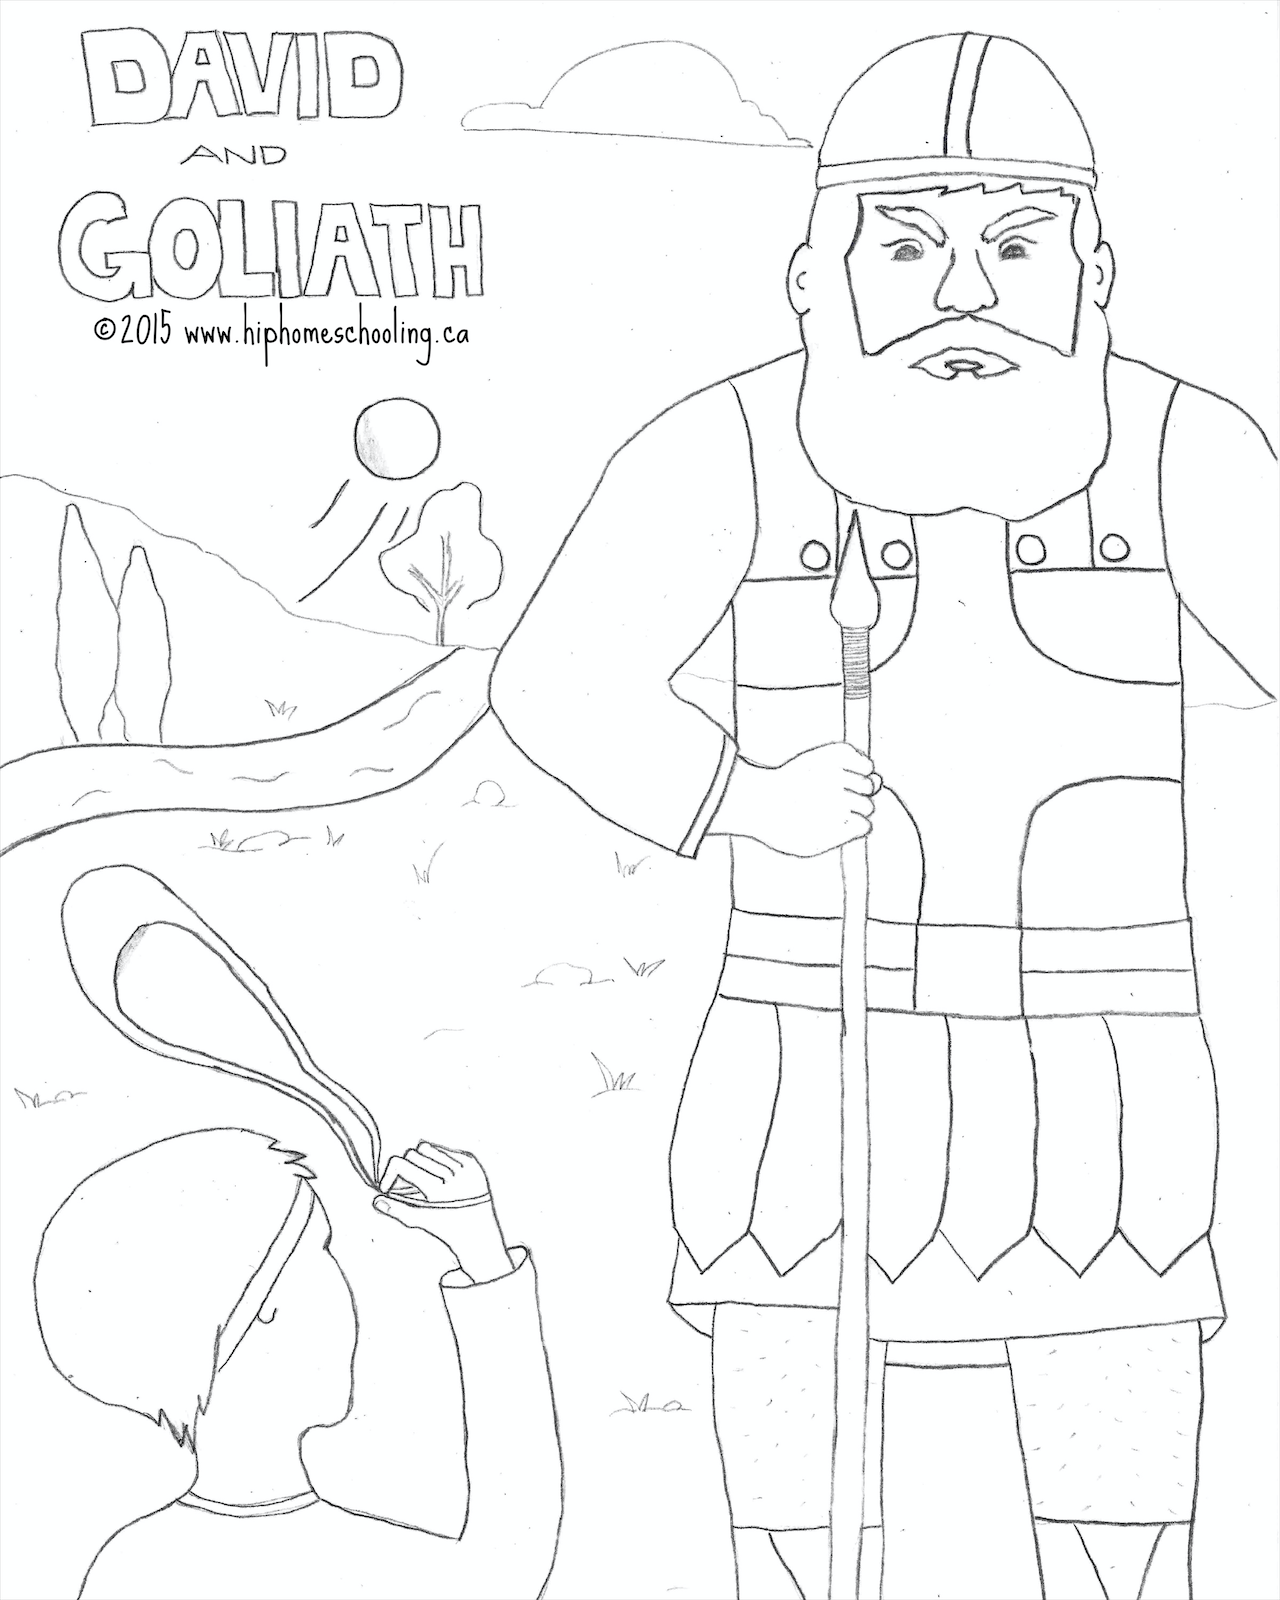 David and Goliath free coloring sheet and lesson plan